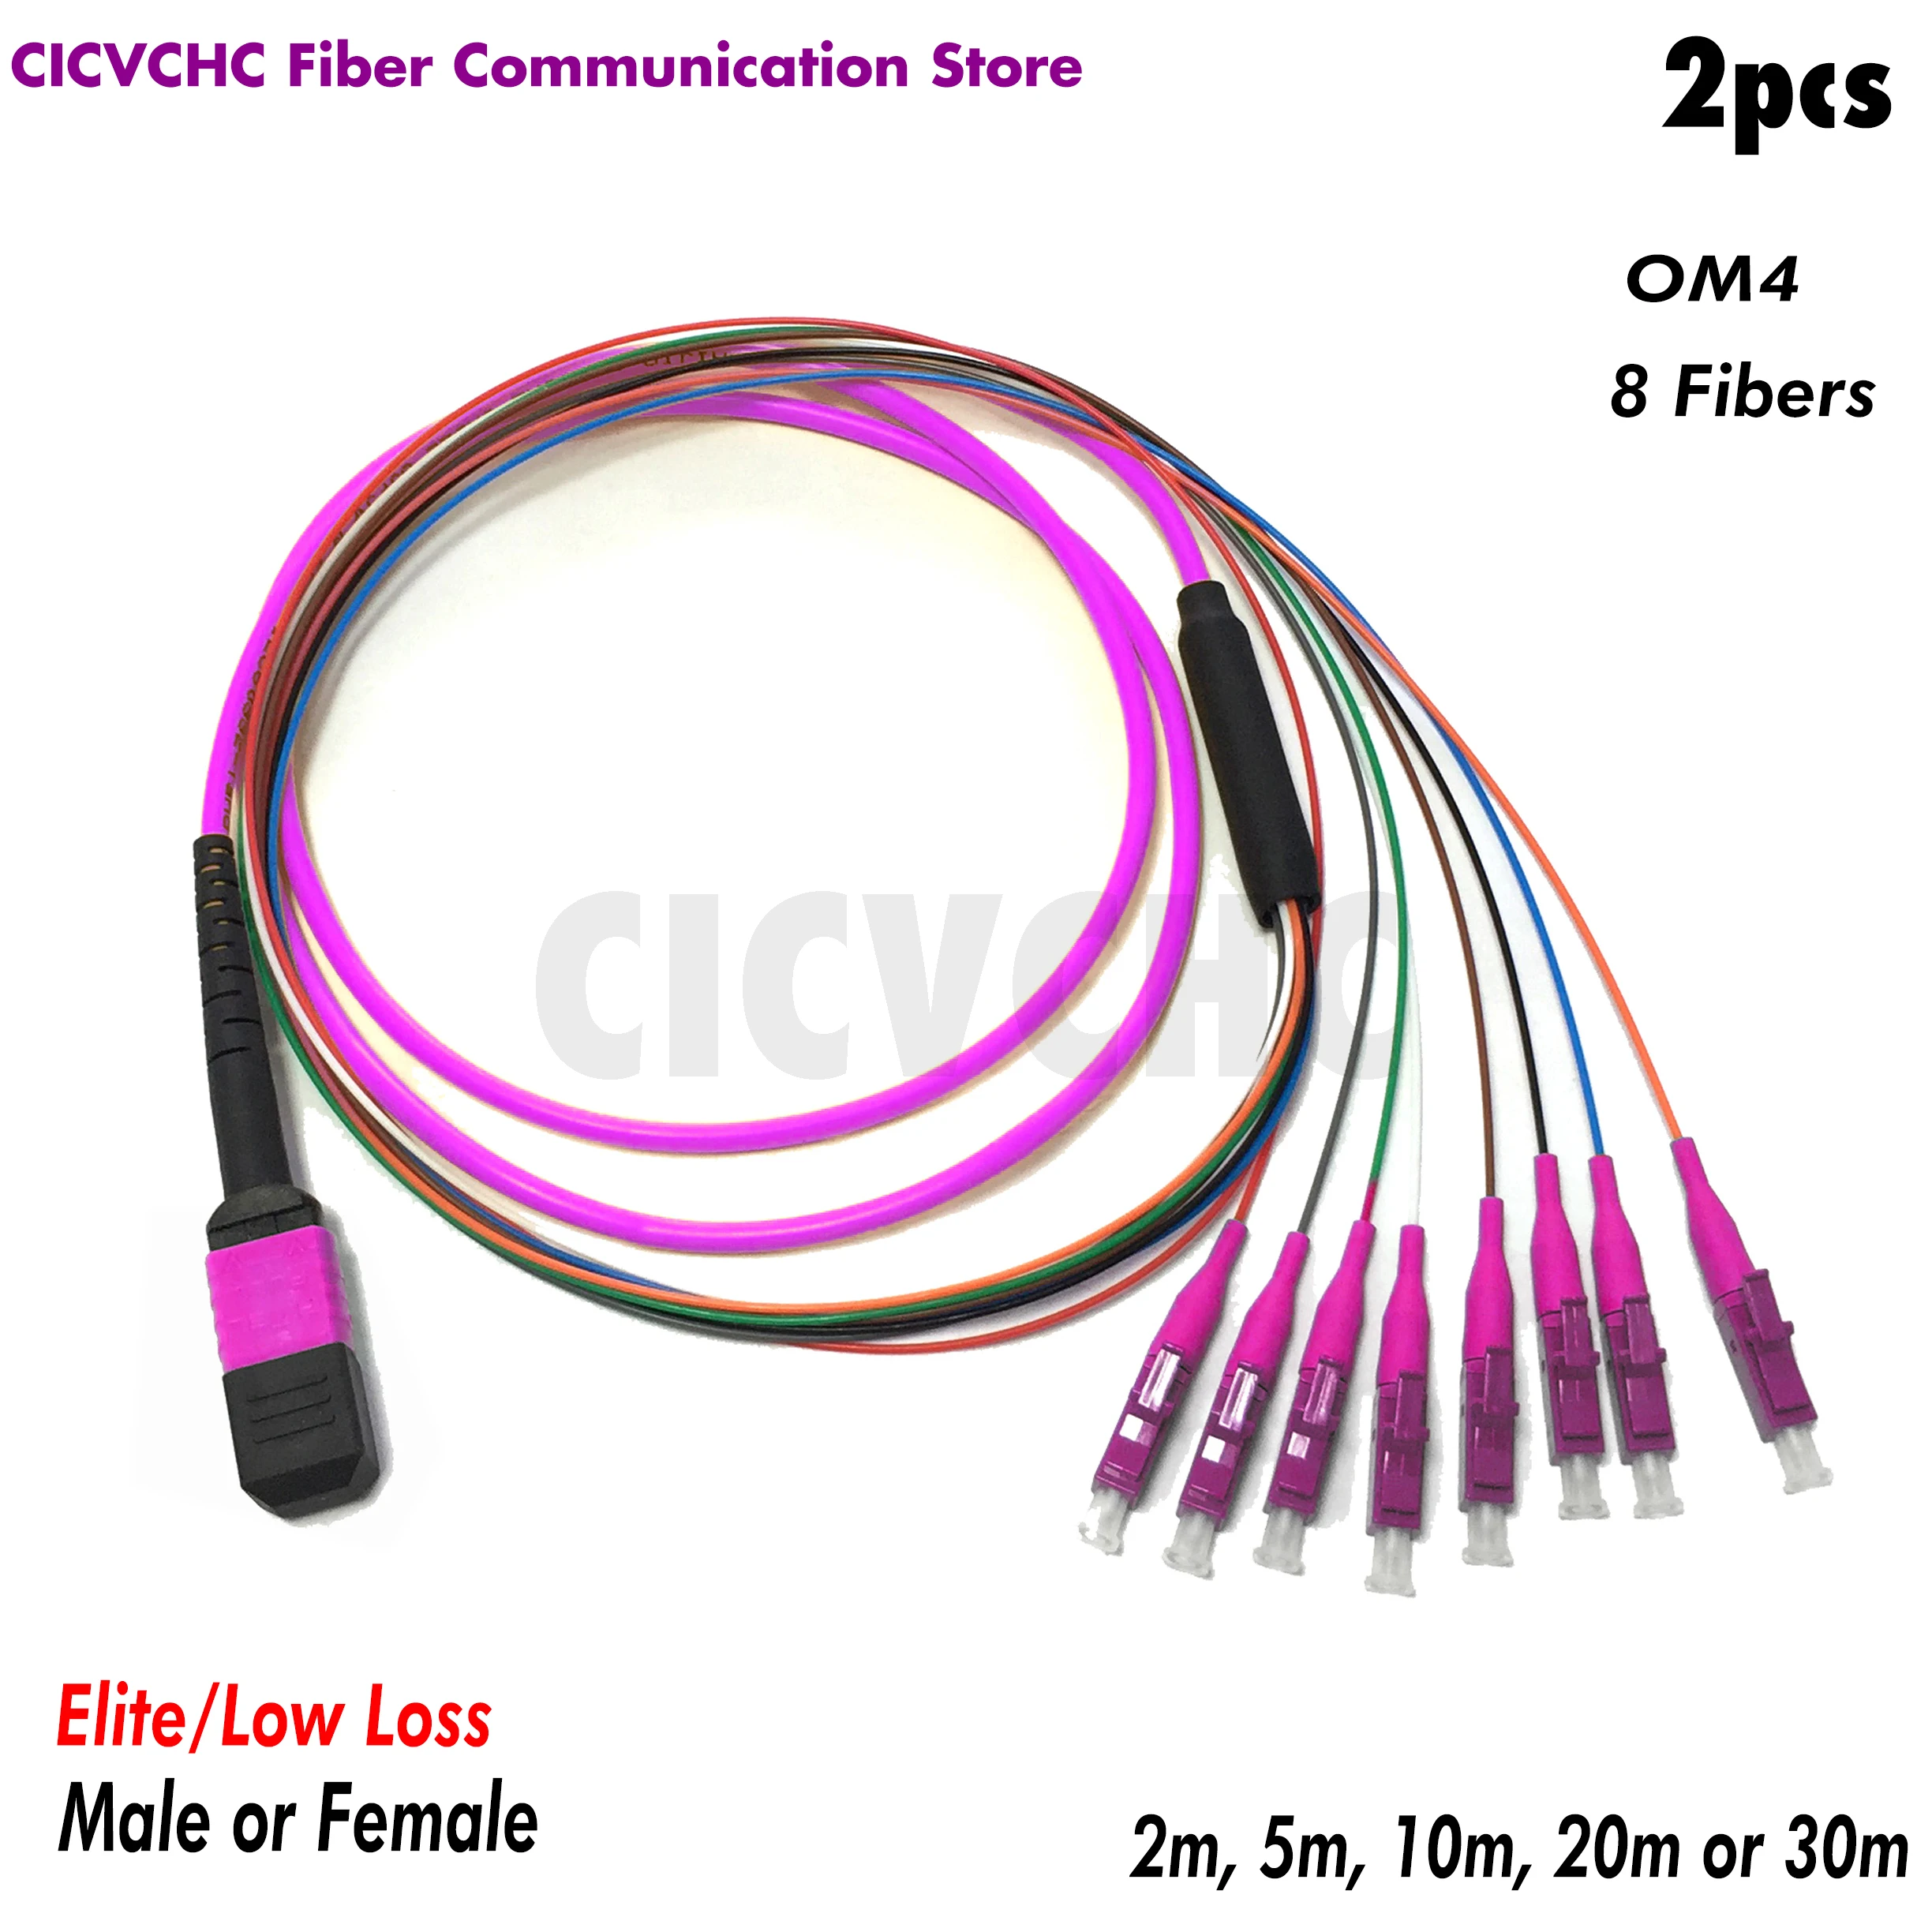 2pcs 8 fibers-MPO/UPC Fanout LC/UPC -OM4-Elite/Low loss-Male/Female with 0.9mm-2m to 30m/MPO Assembly